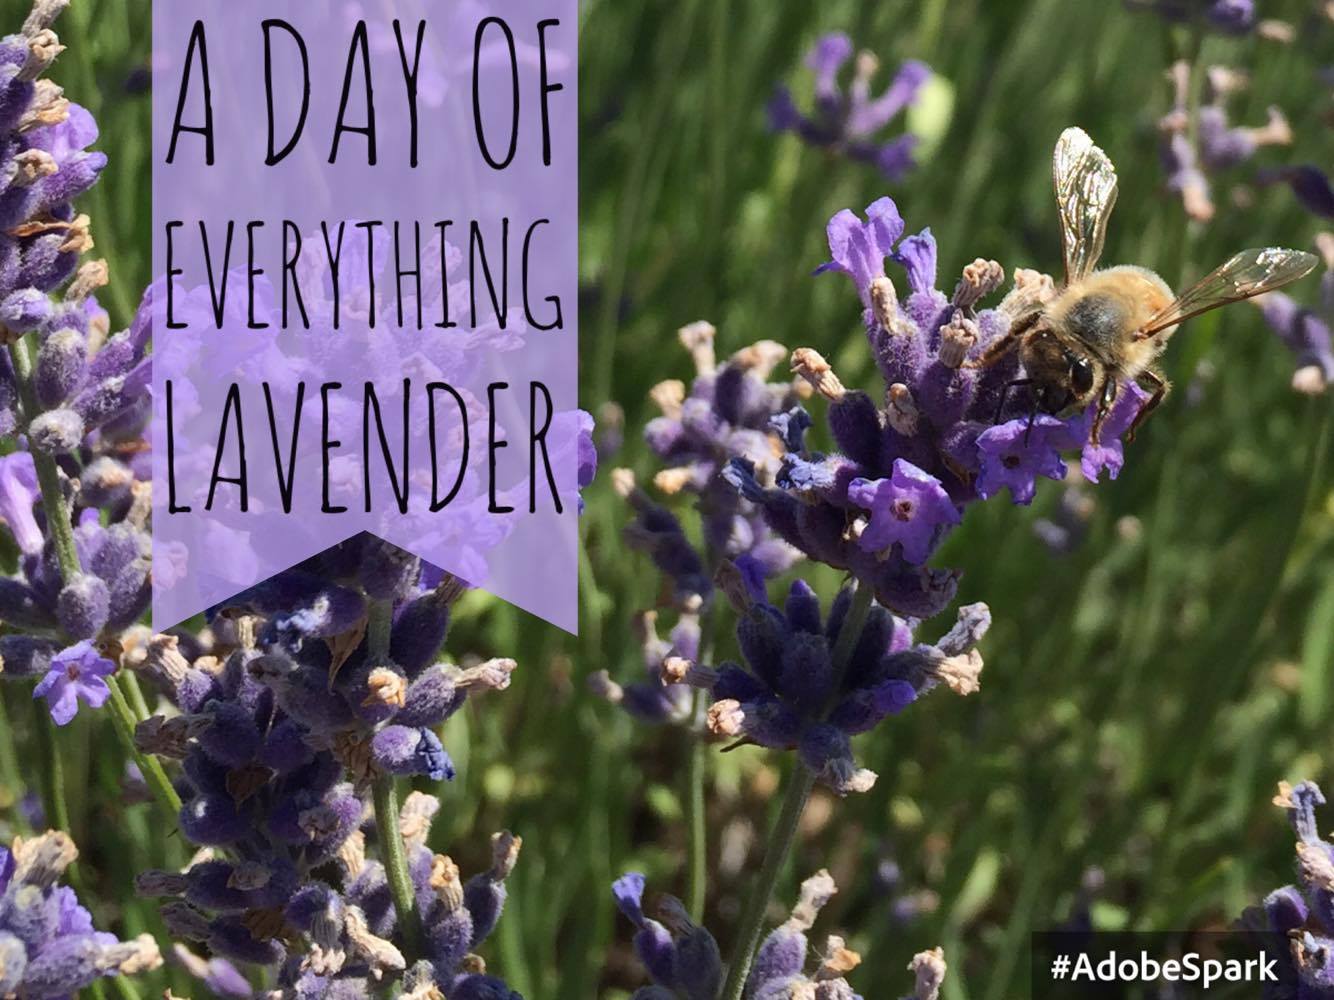 A day of everything lavender festival